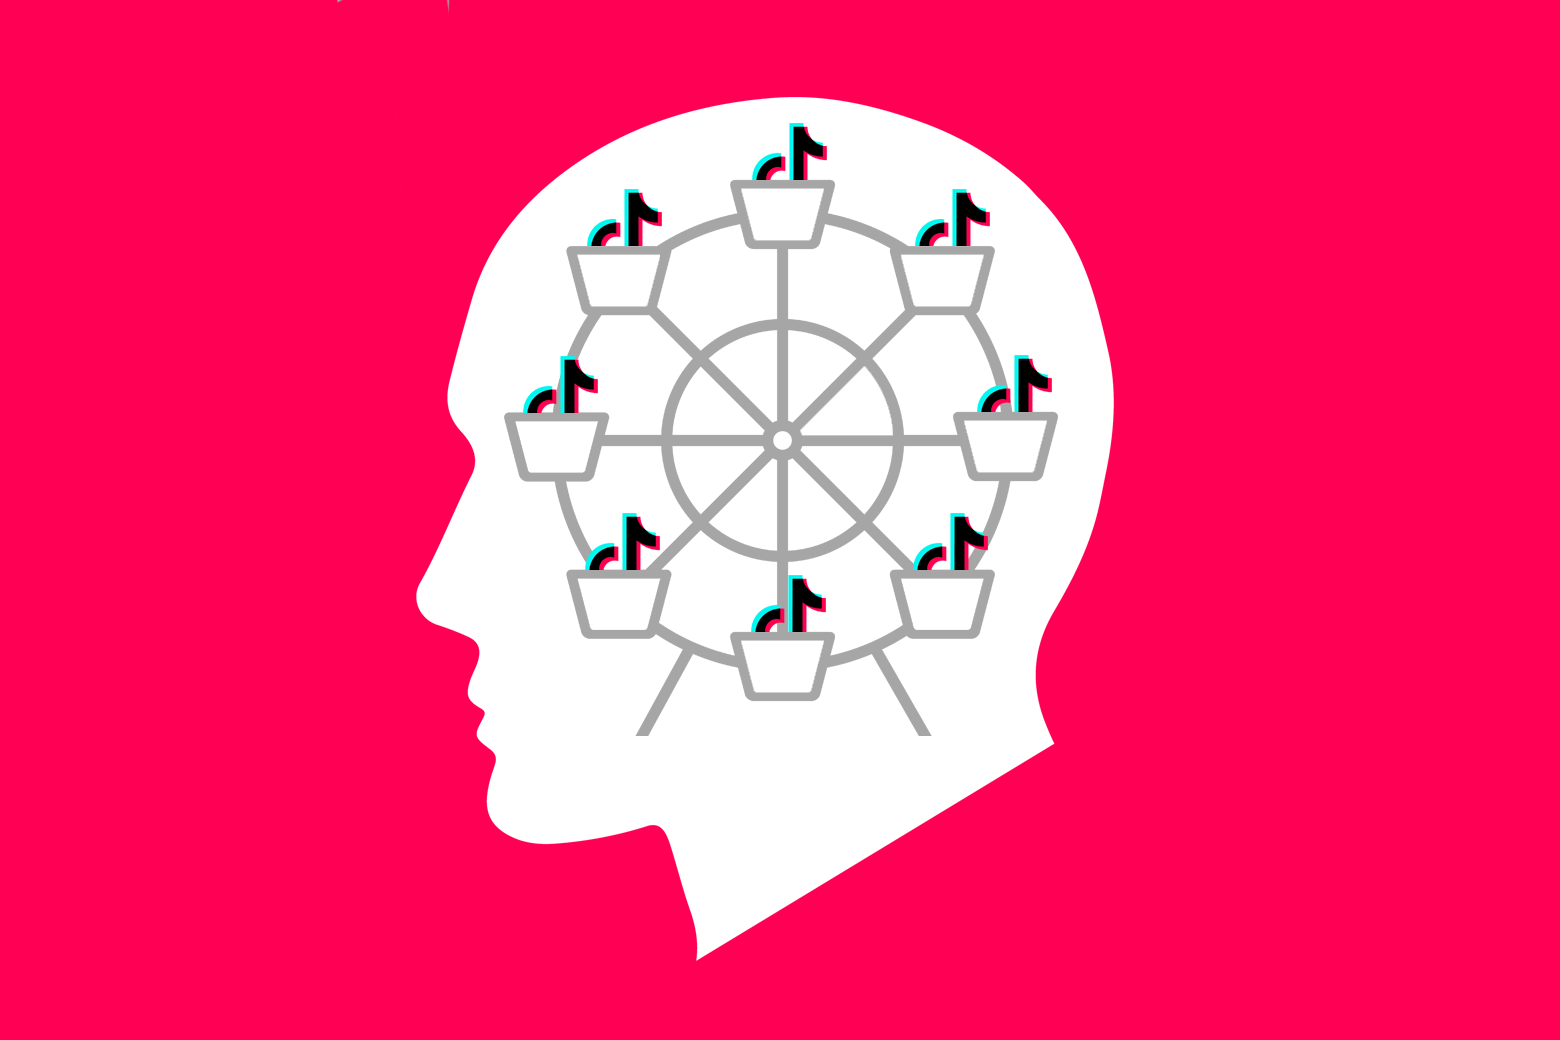 A silhouette of a head with a ferris wheel filled with TikTok logos.